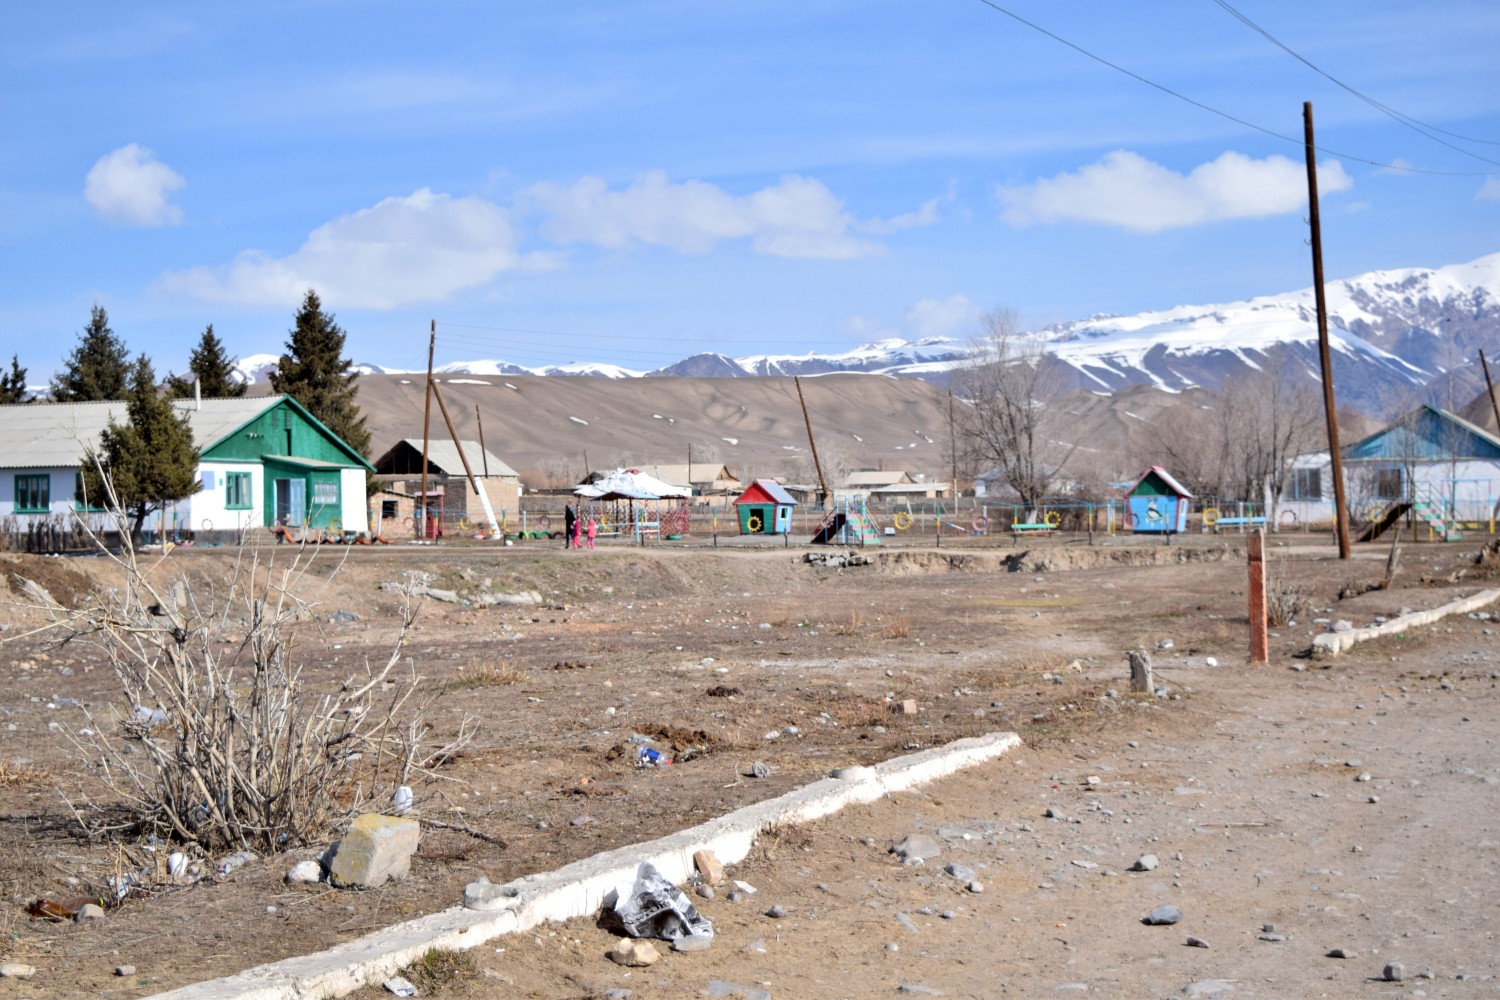 Talking “Citizen Science” in remote communities of the Kyrgyz Tien-Shan mountains